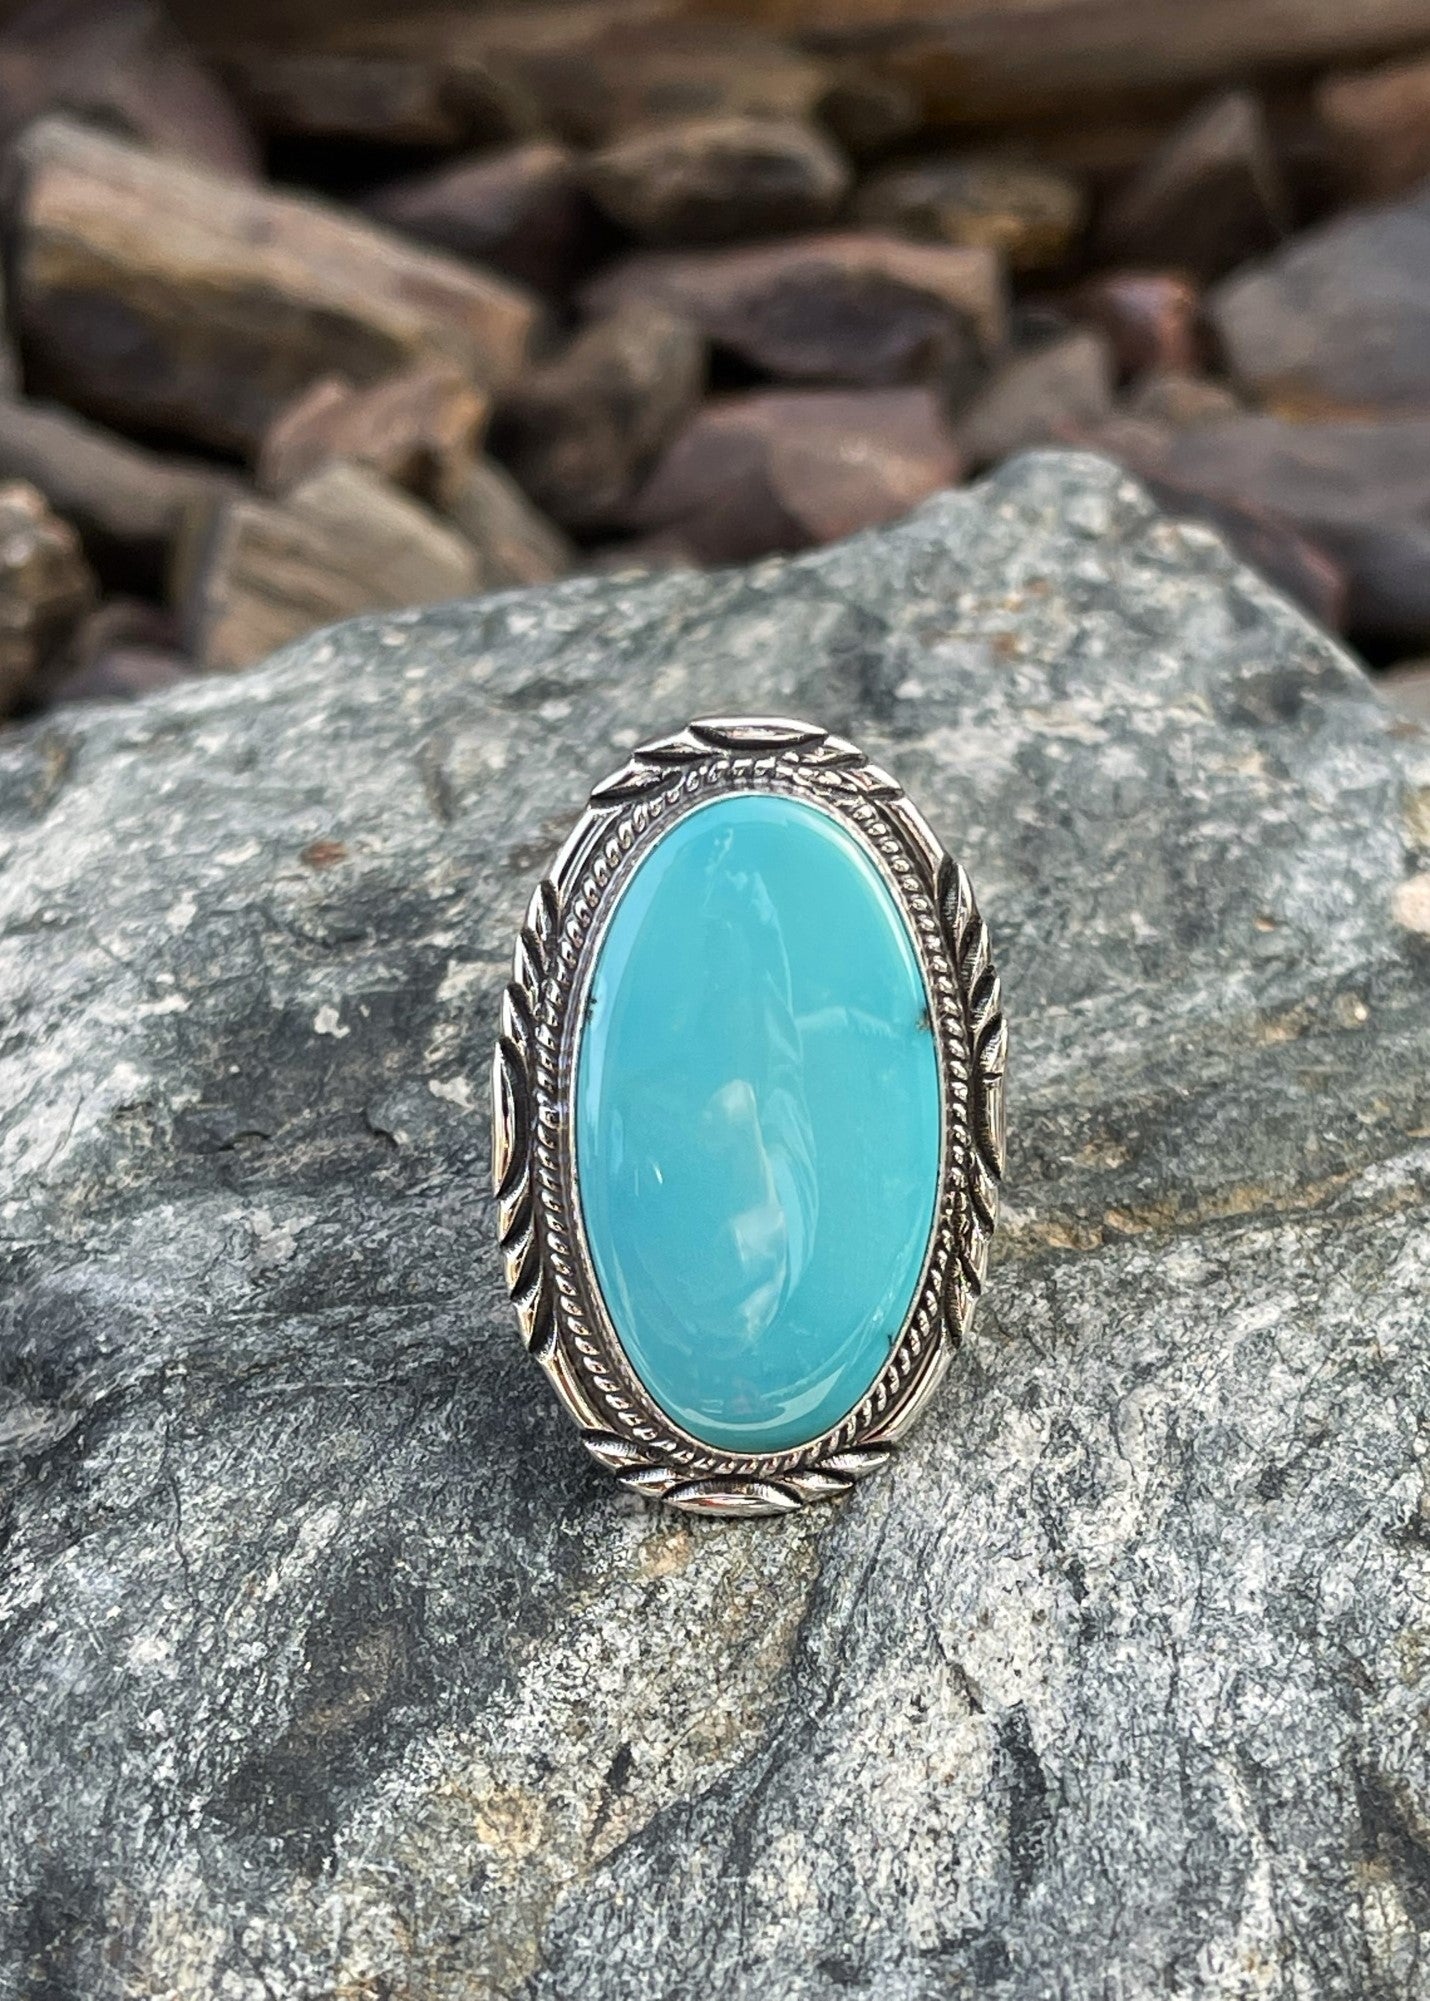 Handmade Sterling Silver Kingman Turquoise Ring with Five Prong Ring Shank- Size 5 1/2